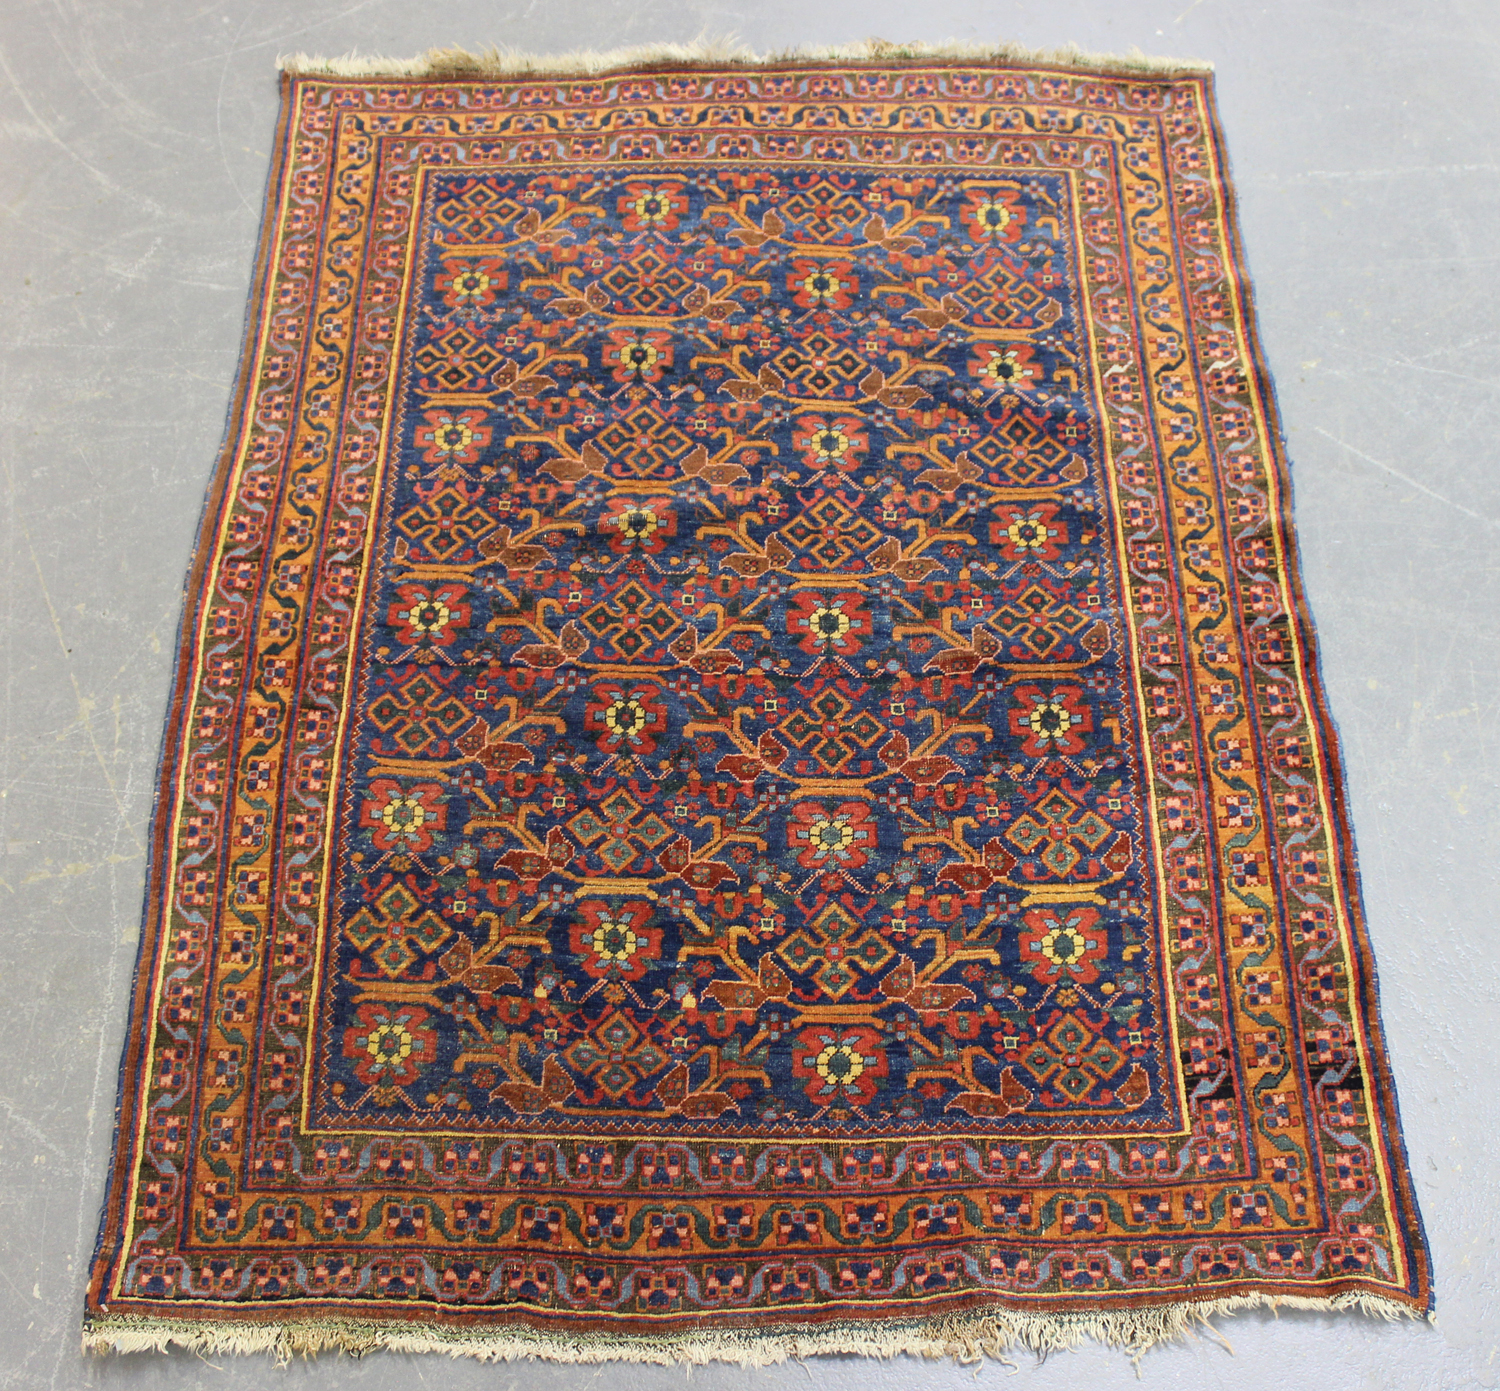 An Afshar rug, South-west Persia, early 20th century, the blue field with an overall bold floral